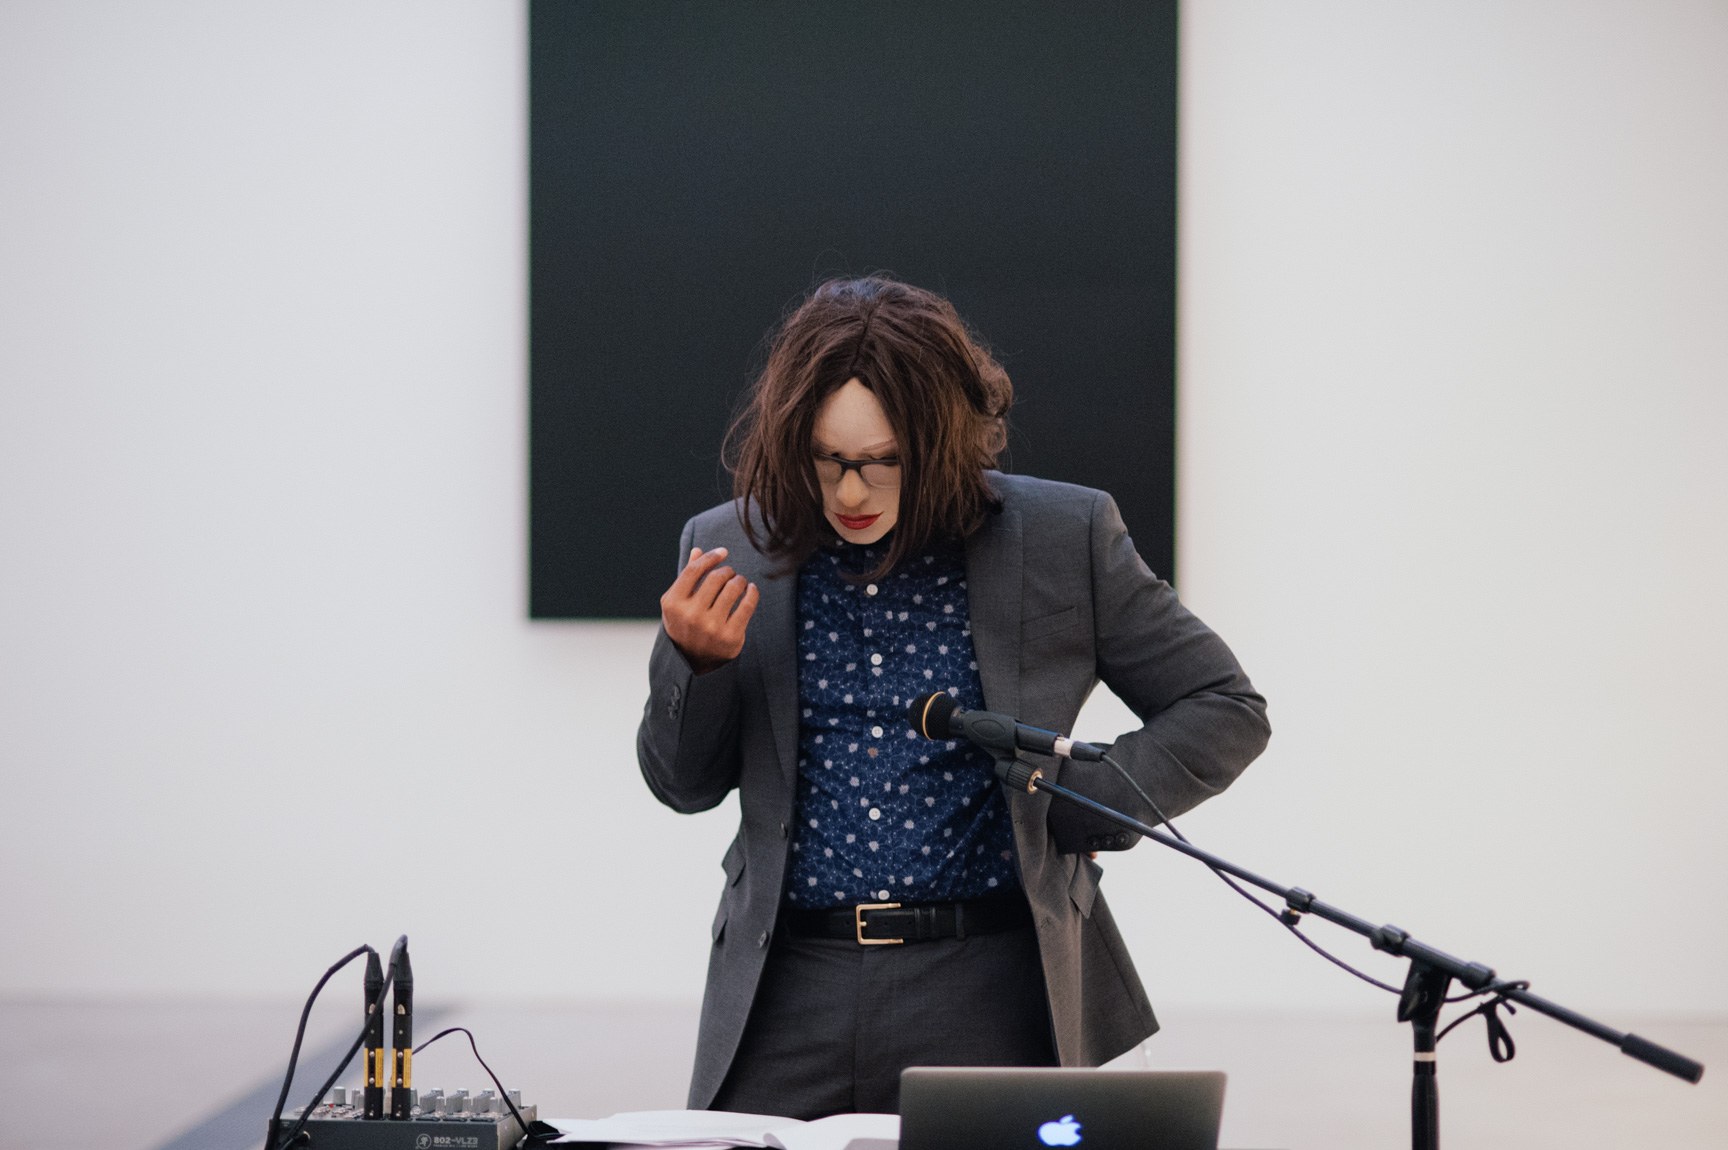 Ronaldo Wilson stands in costume behind a desk looking at their notes and speaks into a microphone. Behind them is Ellsworth Kelly's "Blue Black."